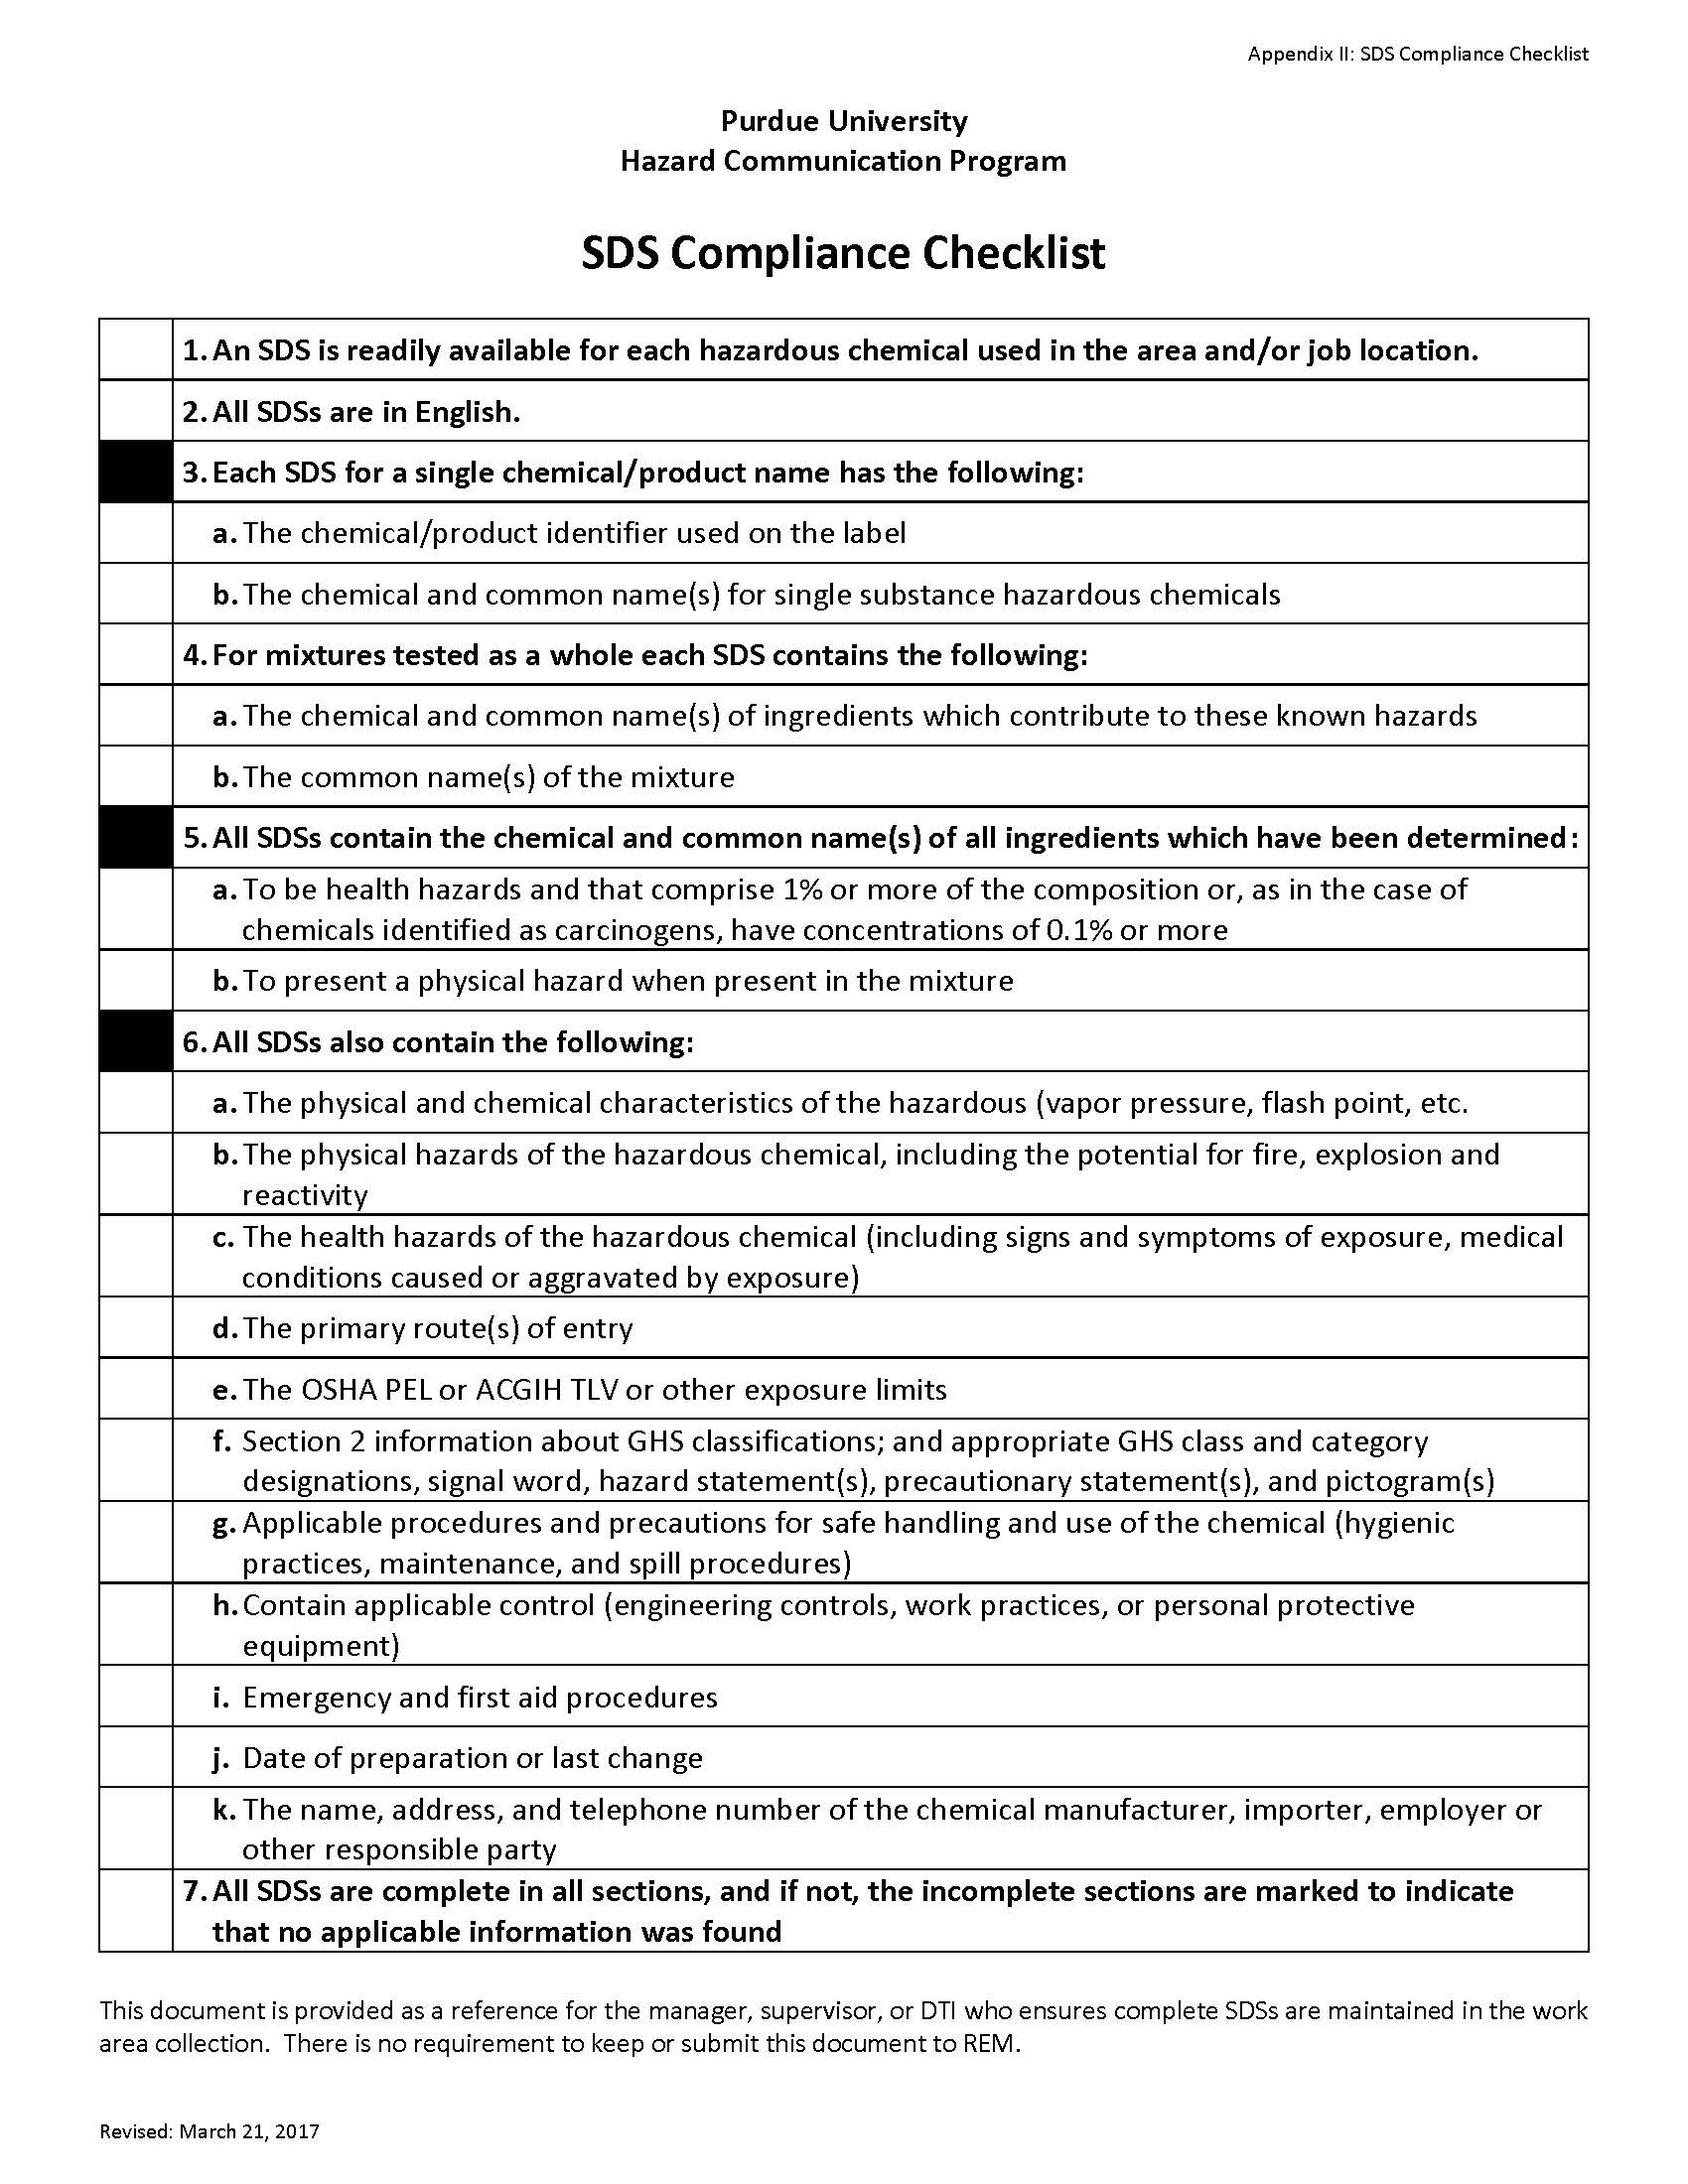 link to pdf of SDS compliance checklist